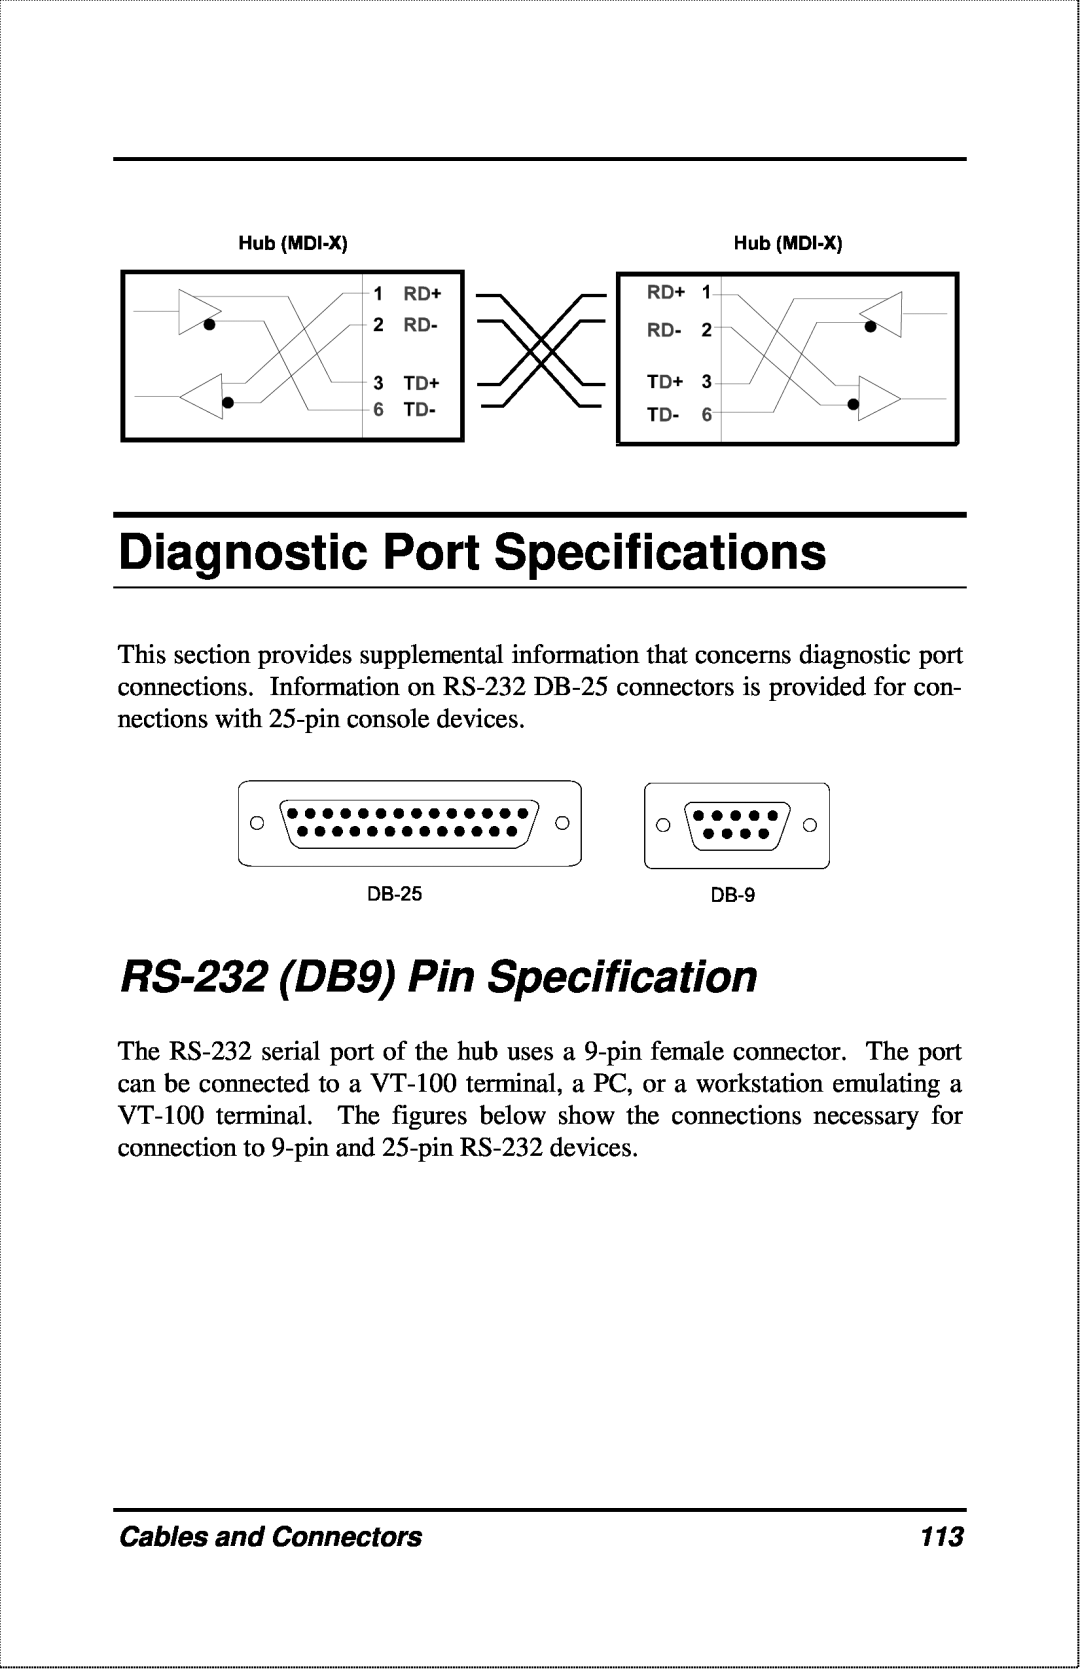 D-Link DFE-2600 manual Diagnostic Port Specifications, RS-232 DB9 Pin Specification, Cables and Connectors 